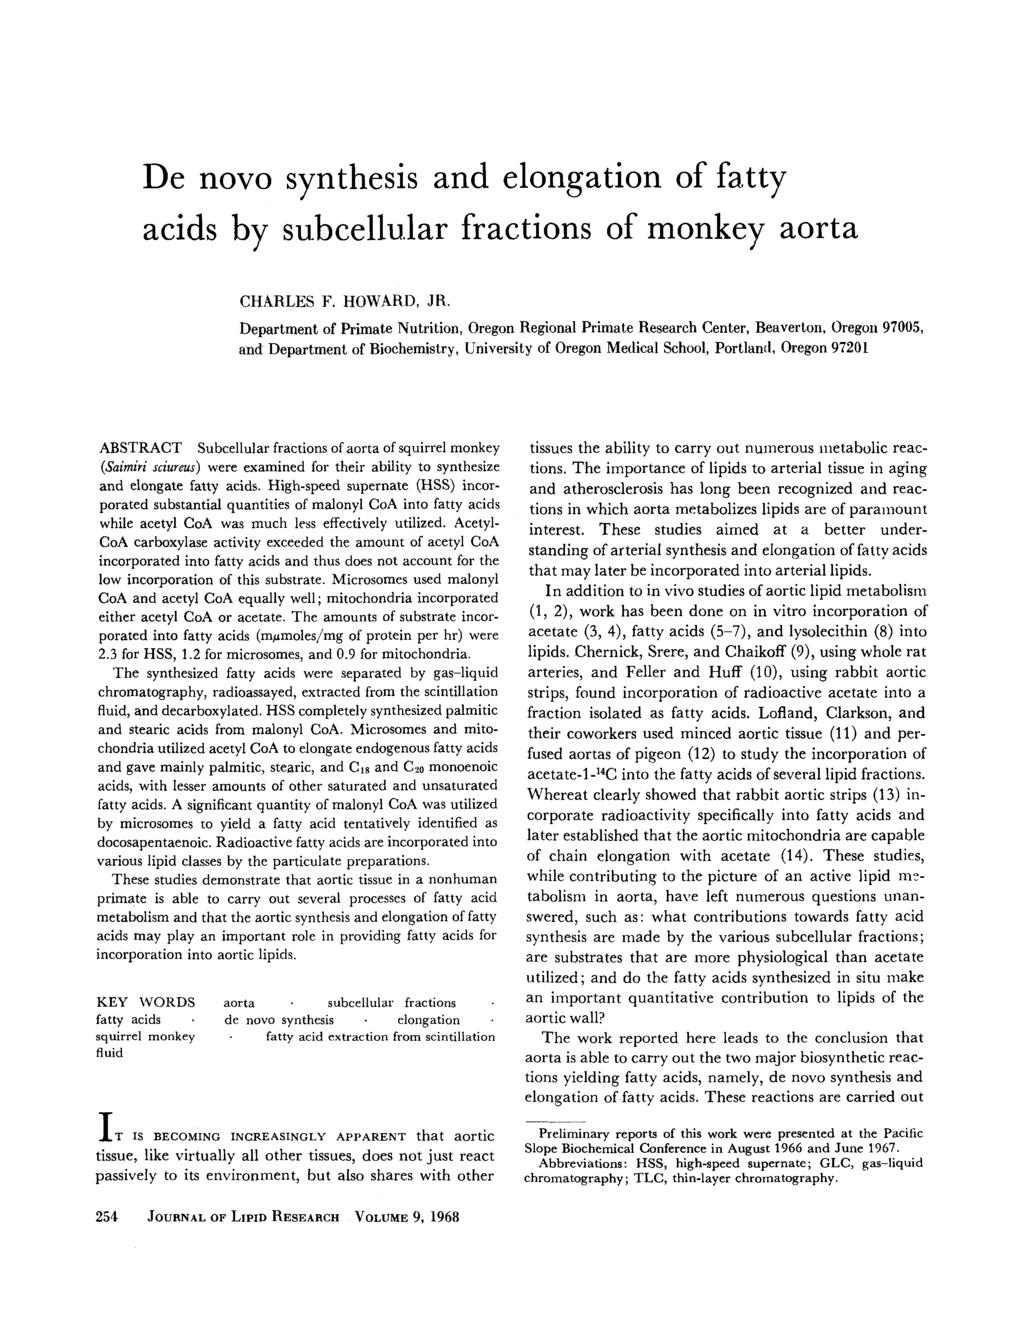 De novo synthesis and elongation of fatty acids by subcellu.lar fractions of monkey aorta CHARLES F. HOWARD, JR.